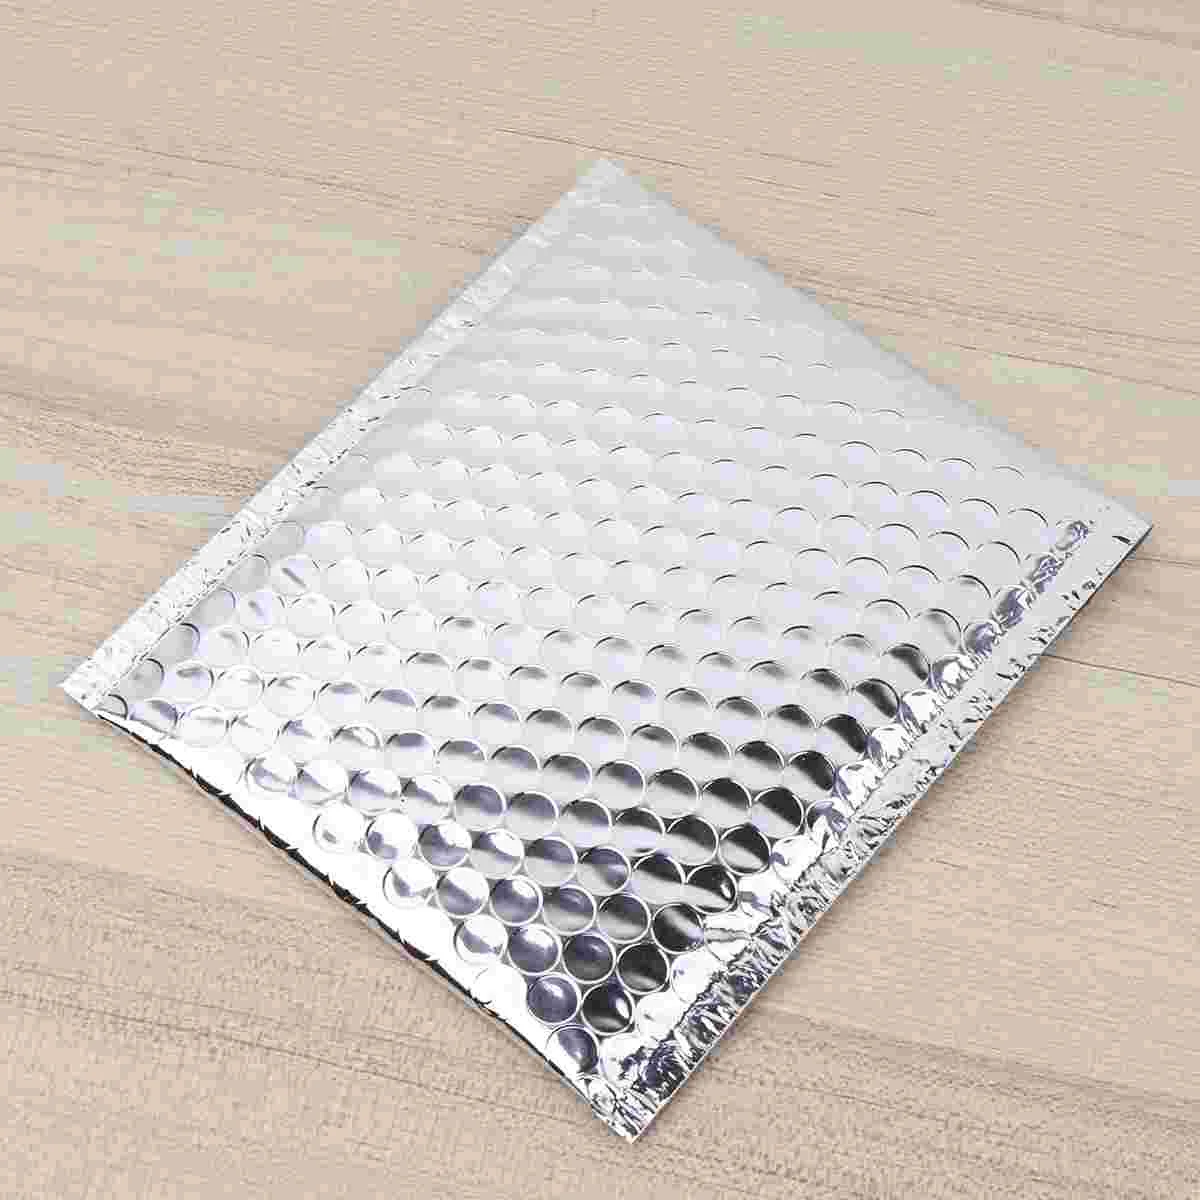 28 Pcs Bubble Bag Shockproof Packaging Metal Small Envelope Waterproof Logistic Express 50pcs pack bubble envelope mailing one book bag waterproof bubble mail bag buffer office envelope shockproof courier bag